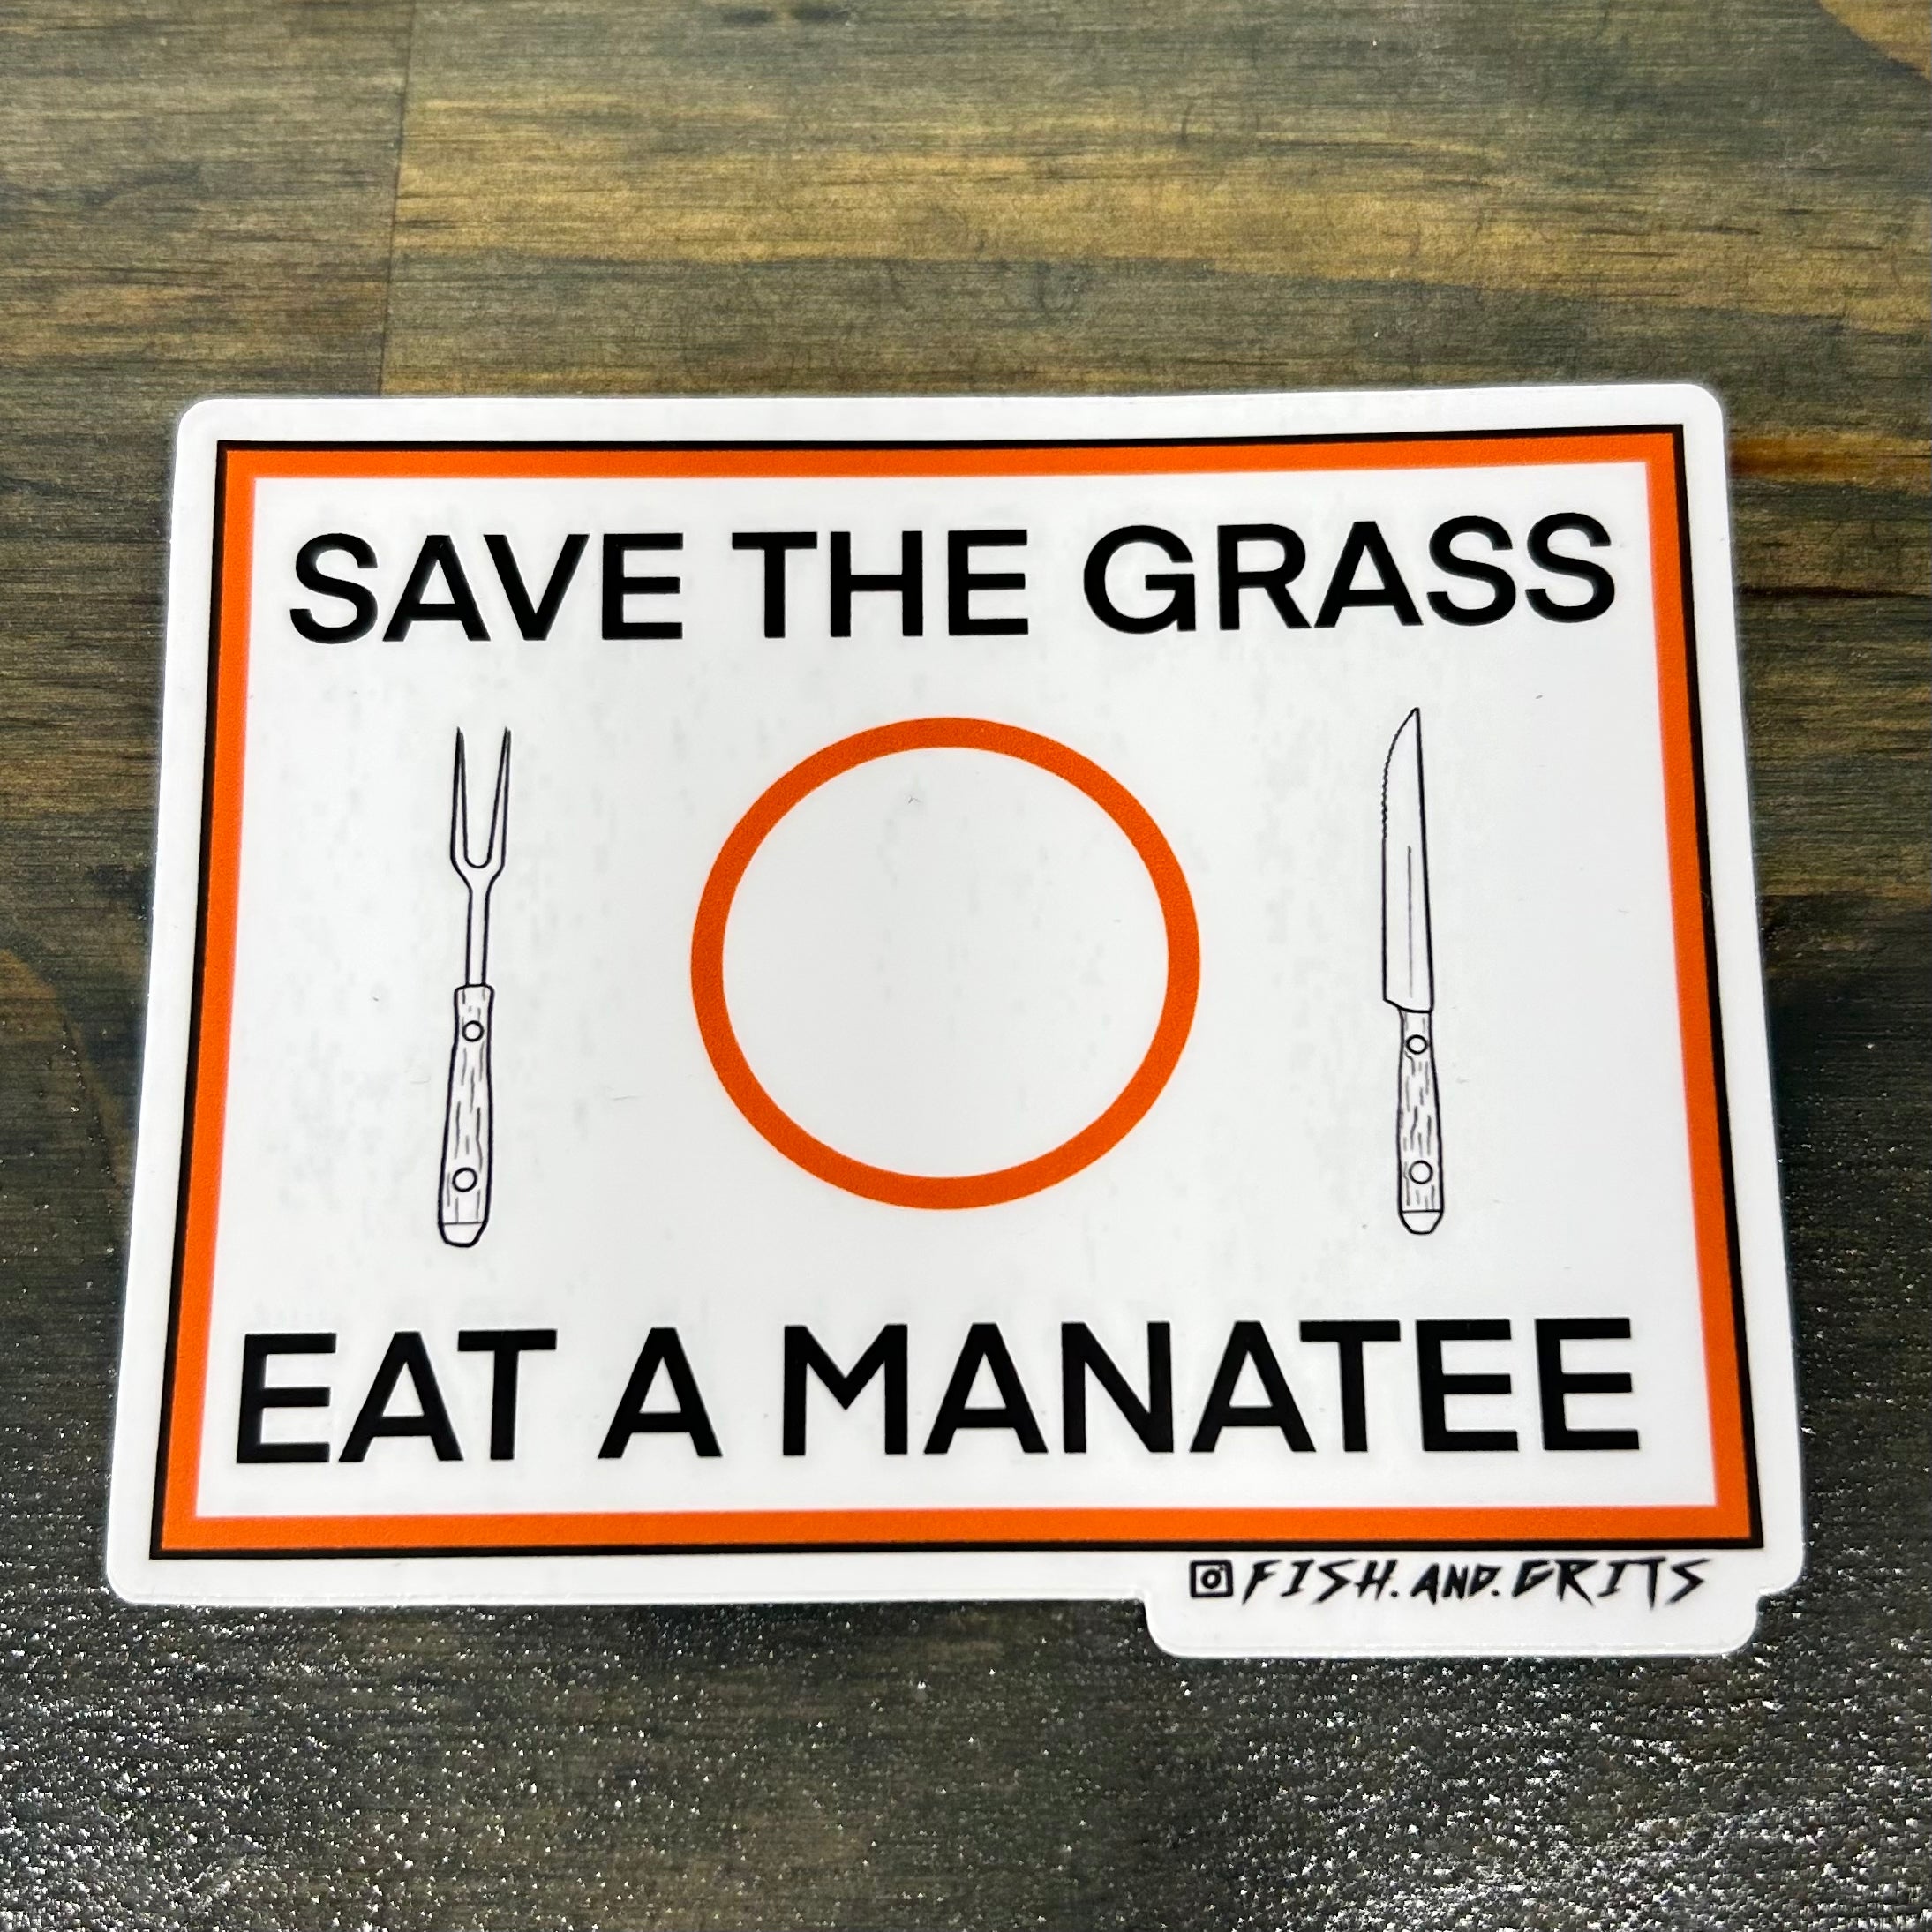 Fish and Grits “save the grass” sticker